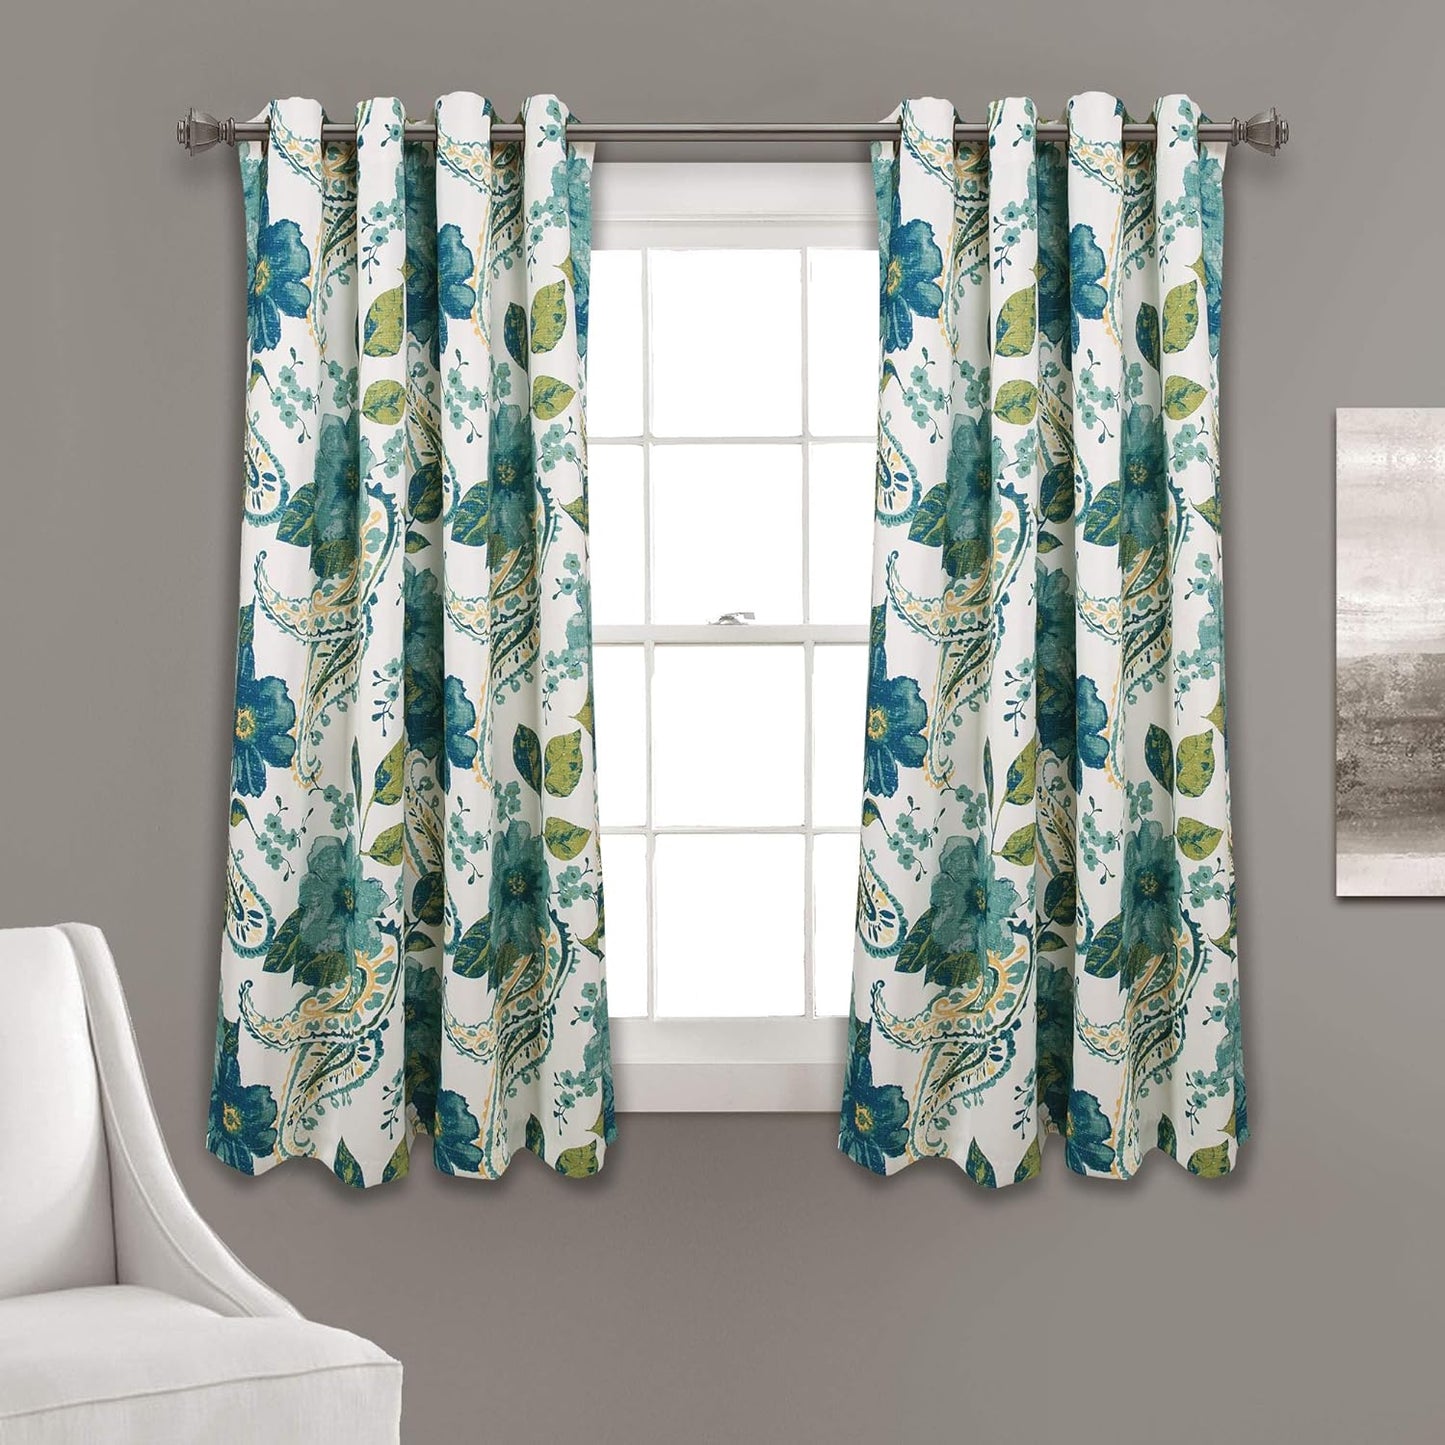 Lush Decor Floral Paisley Light Filtering Window Curtain Panel Pair, 52"W X 84"L, Blue  Triangle Home Fashions 52"W X 63"L  